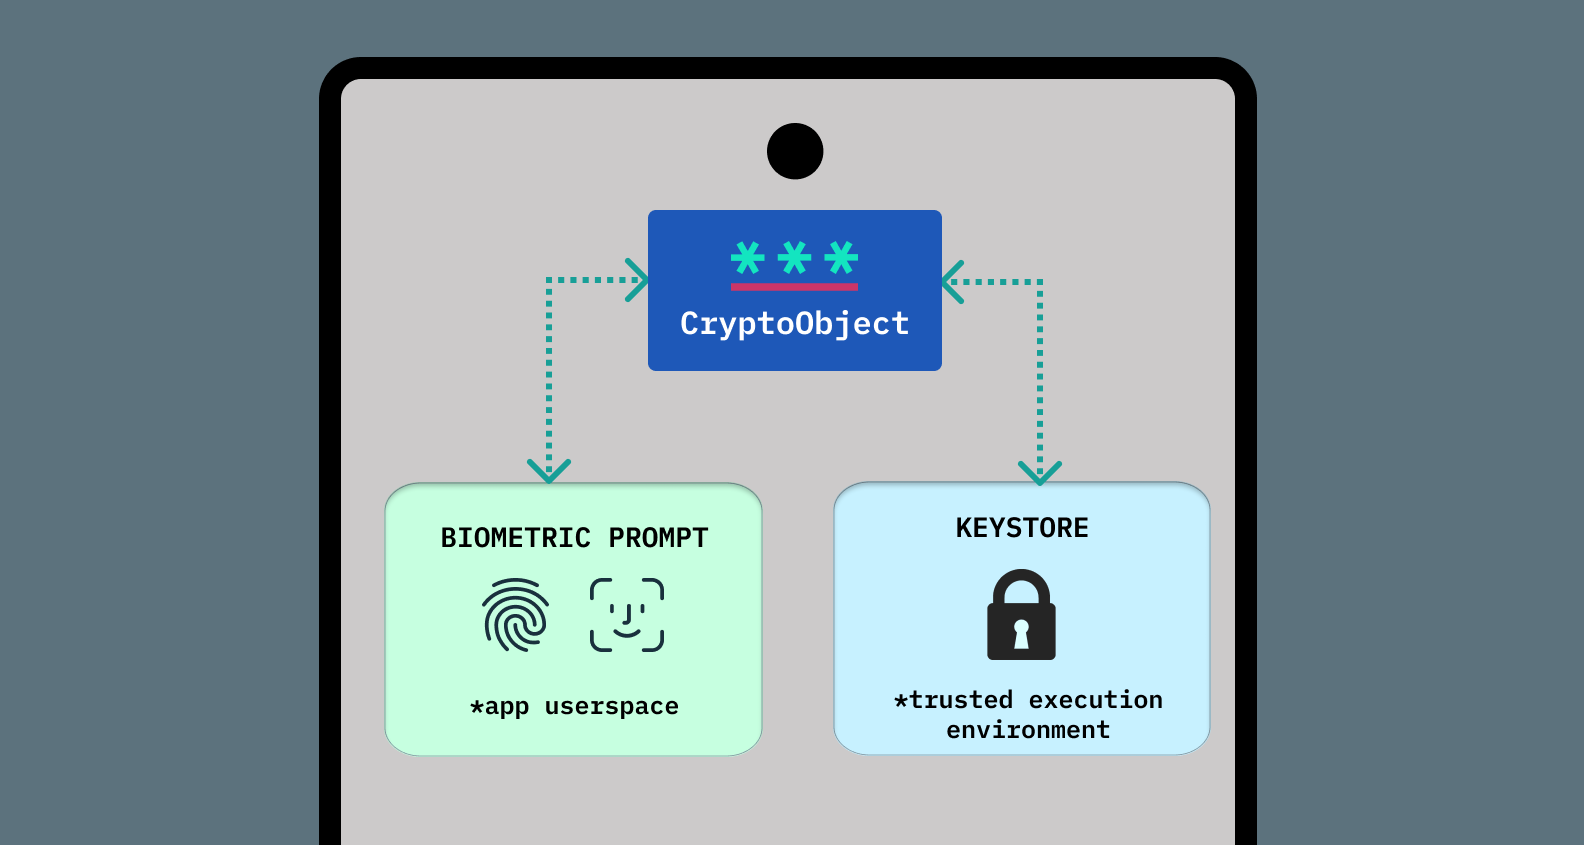 The CryptoObject brokers access between the stored, encrypted private key and the biometric prompt.